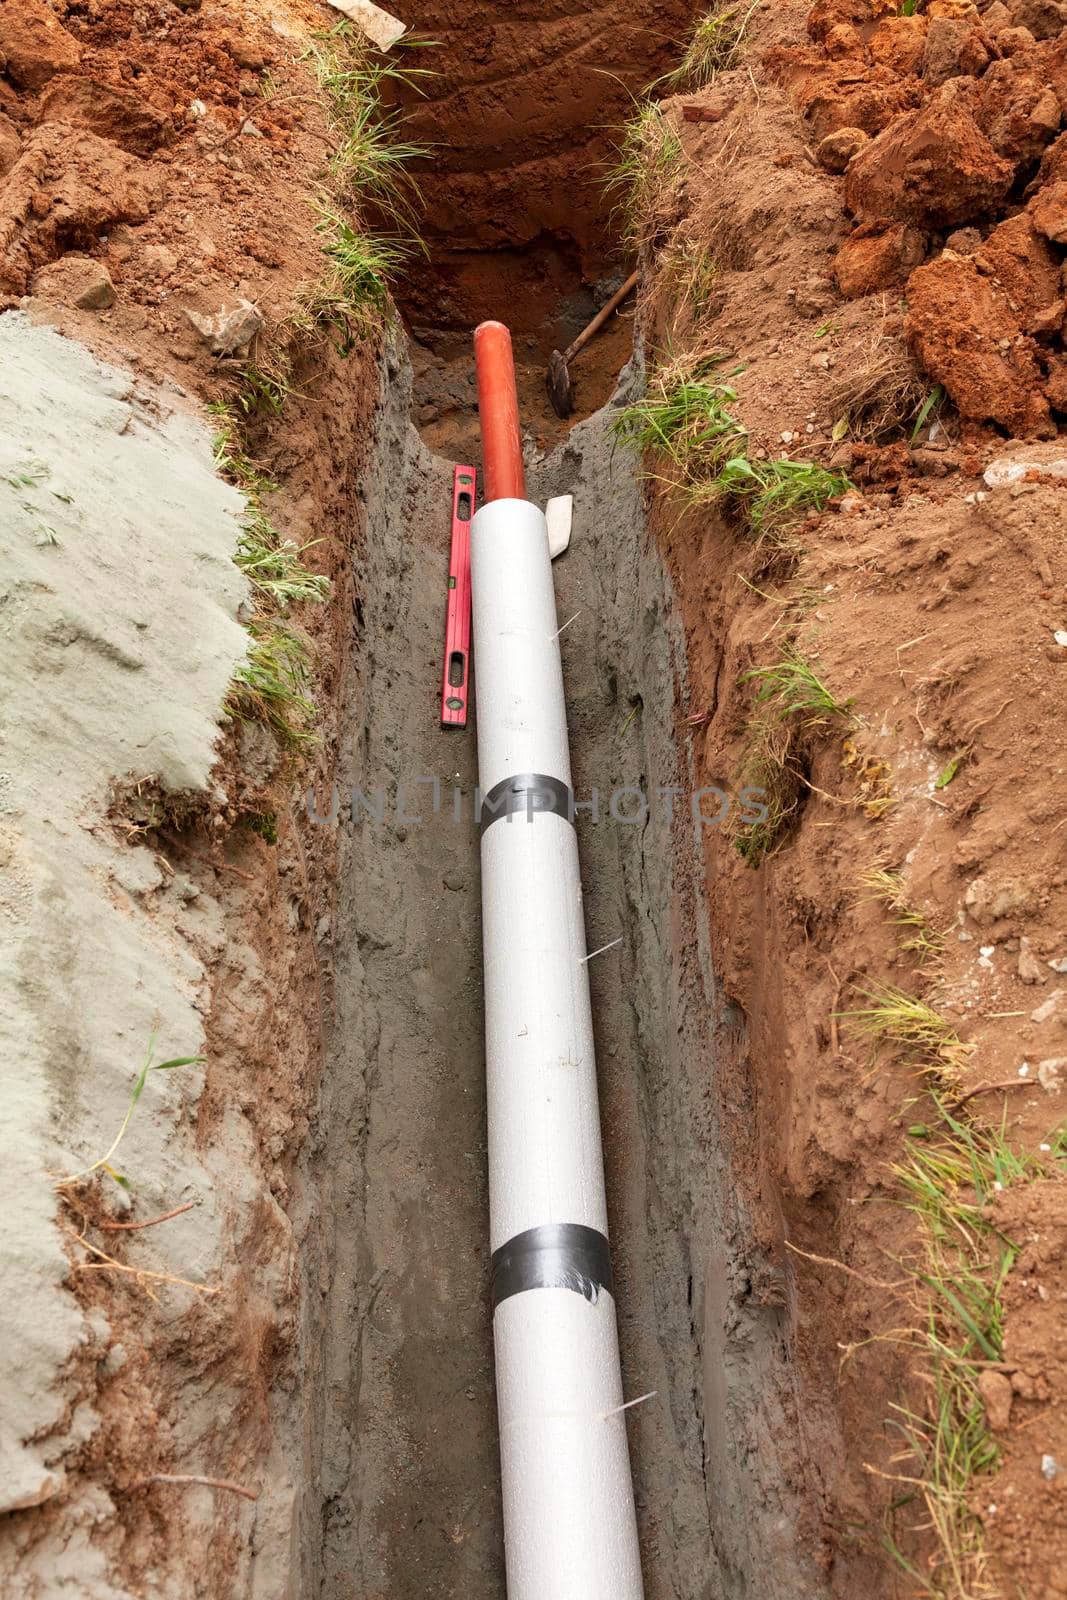 Installation of water main, sanitary sewer, storm drain systems, plastic pipes wrapped in insulation by Nobilior